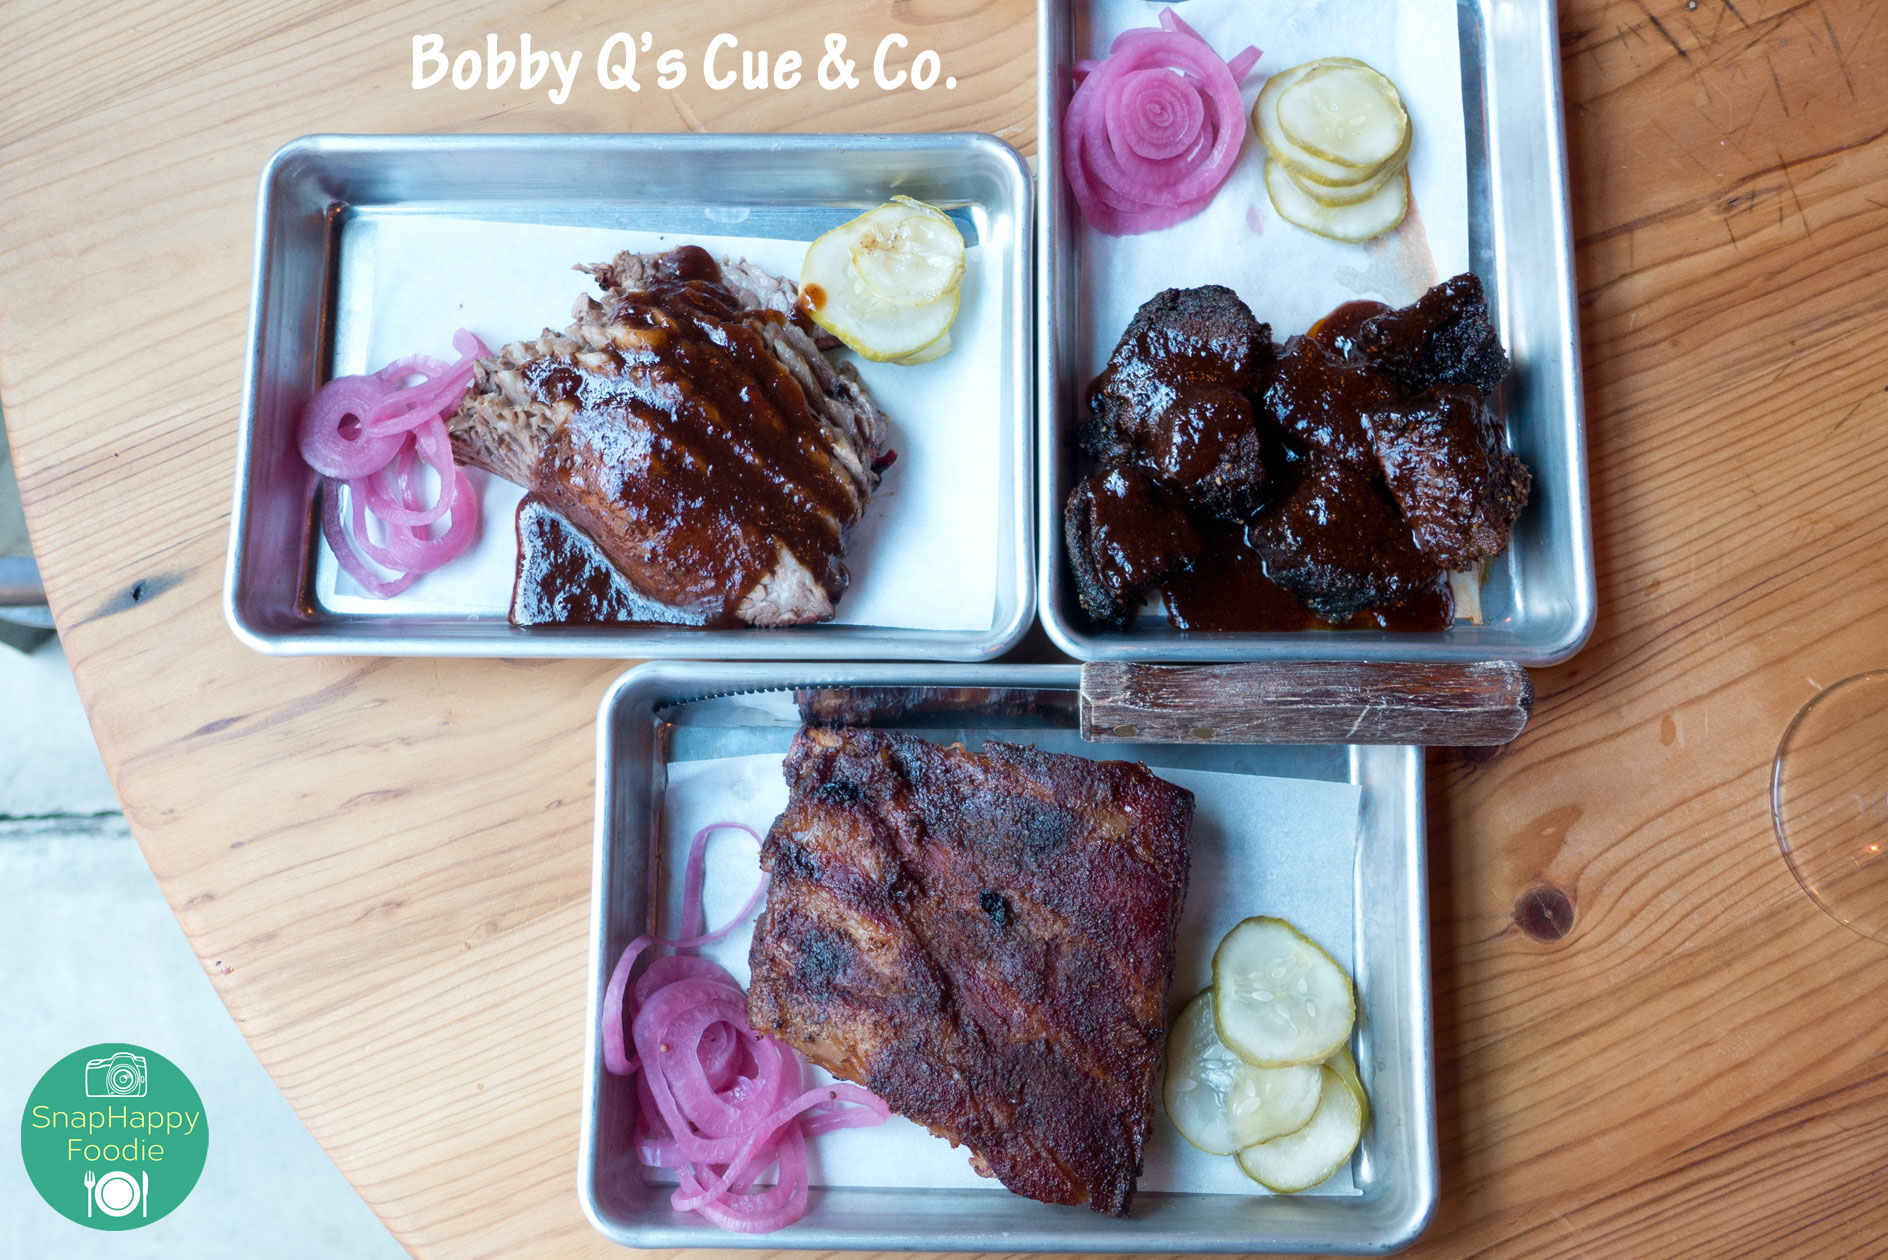 Brisket, Burnt Ends &amp; St. Louis Ribs from Bobby Q’s Cue & Co. South Norwalk, CT